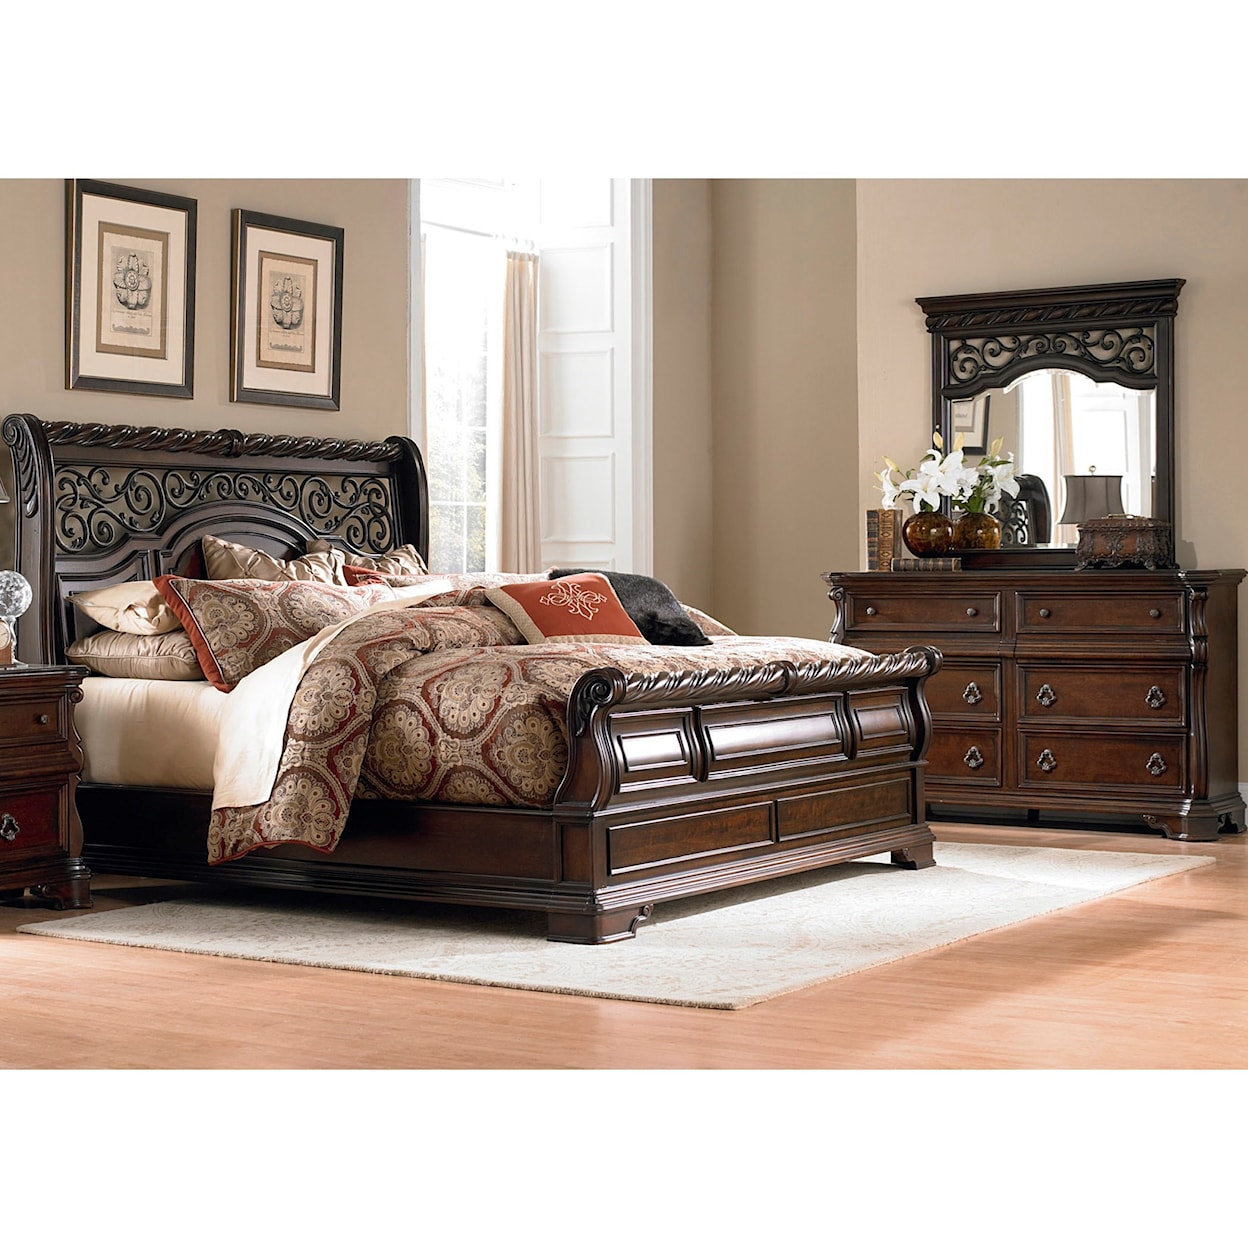 Liberty Furniture Arbor Place King Bedroom Group